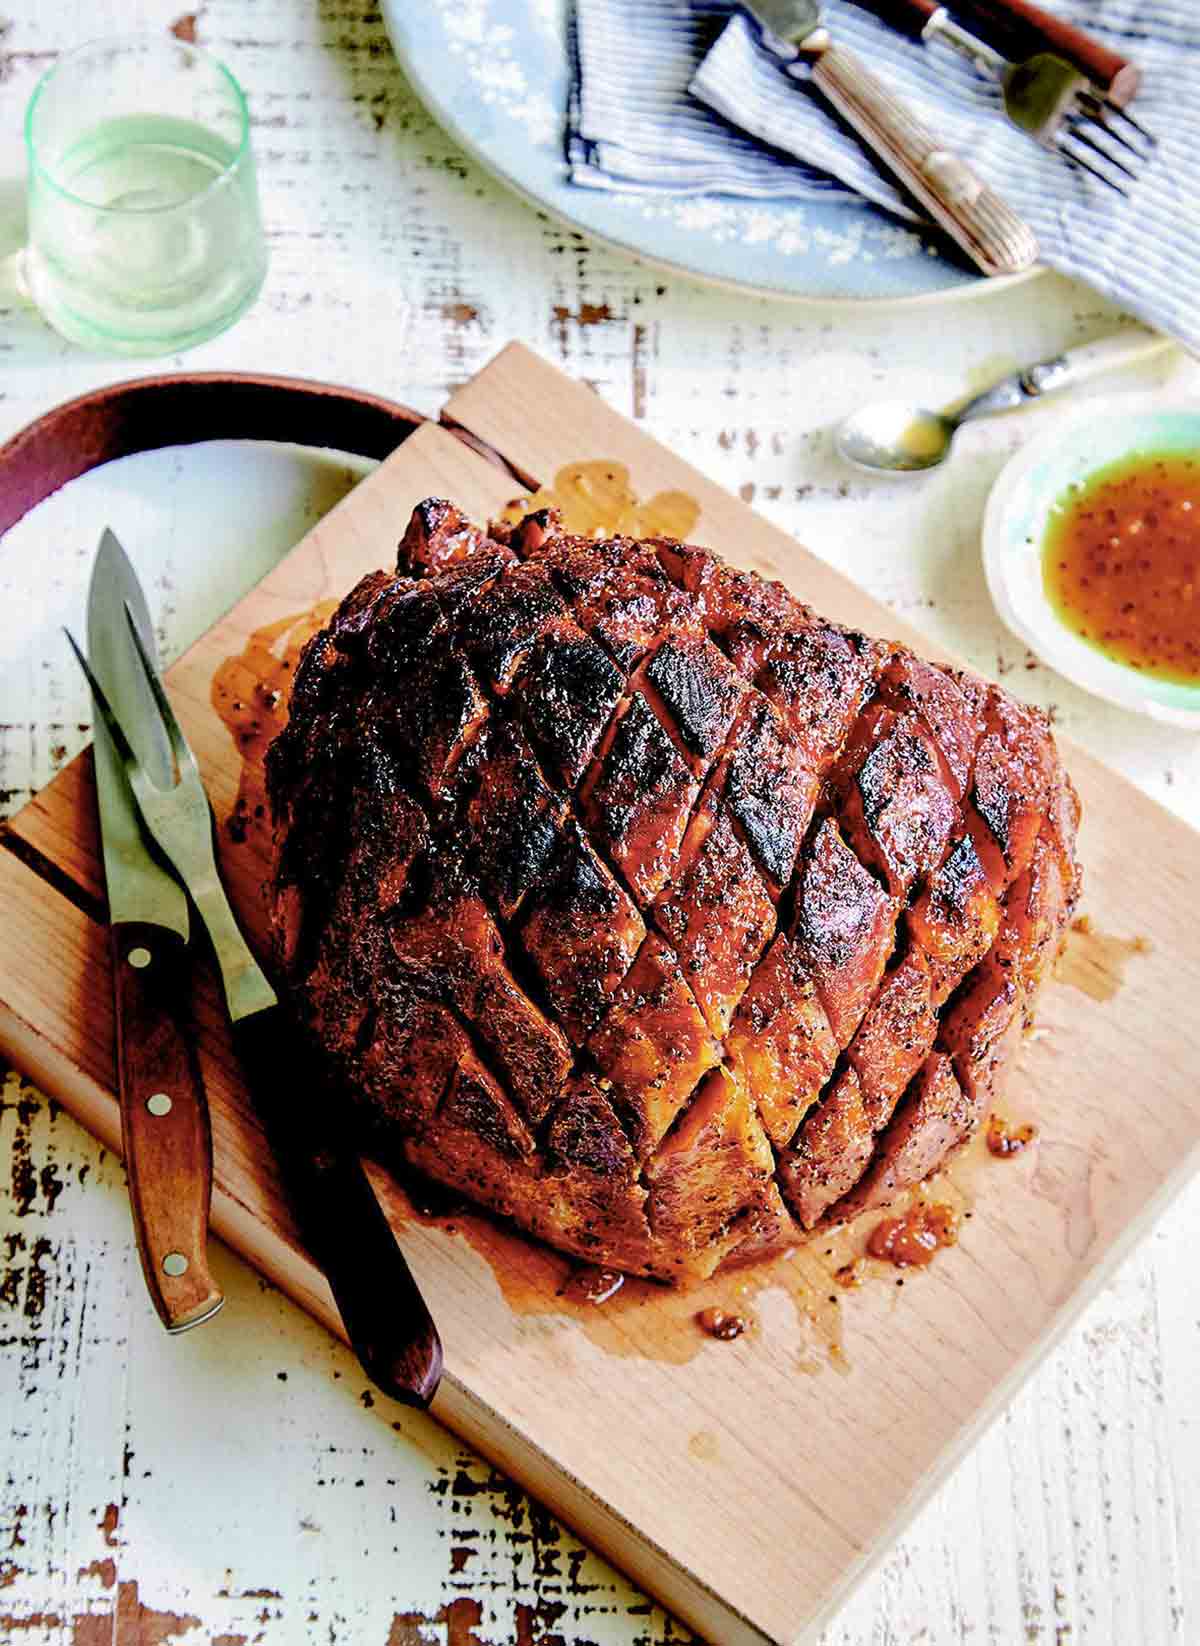 A cooked ham with broiled crispy skin on a wooden cutting board with a dish of sauce on the side.